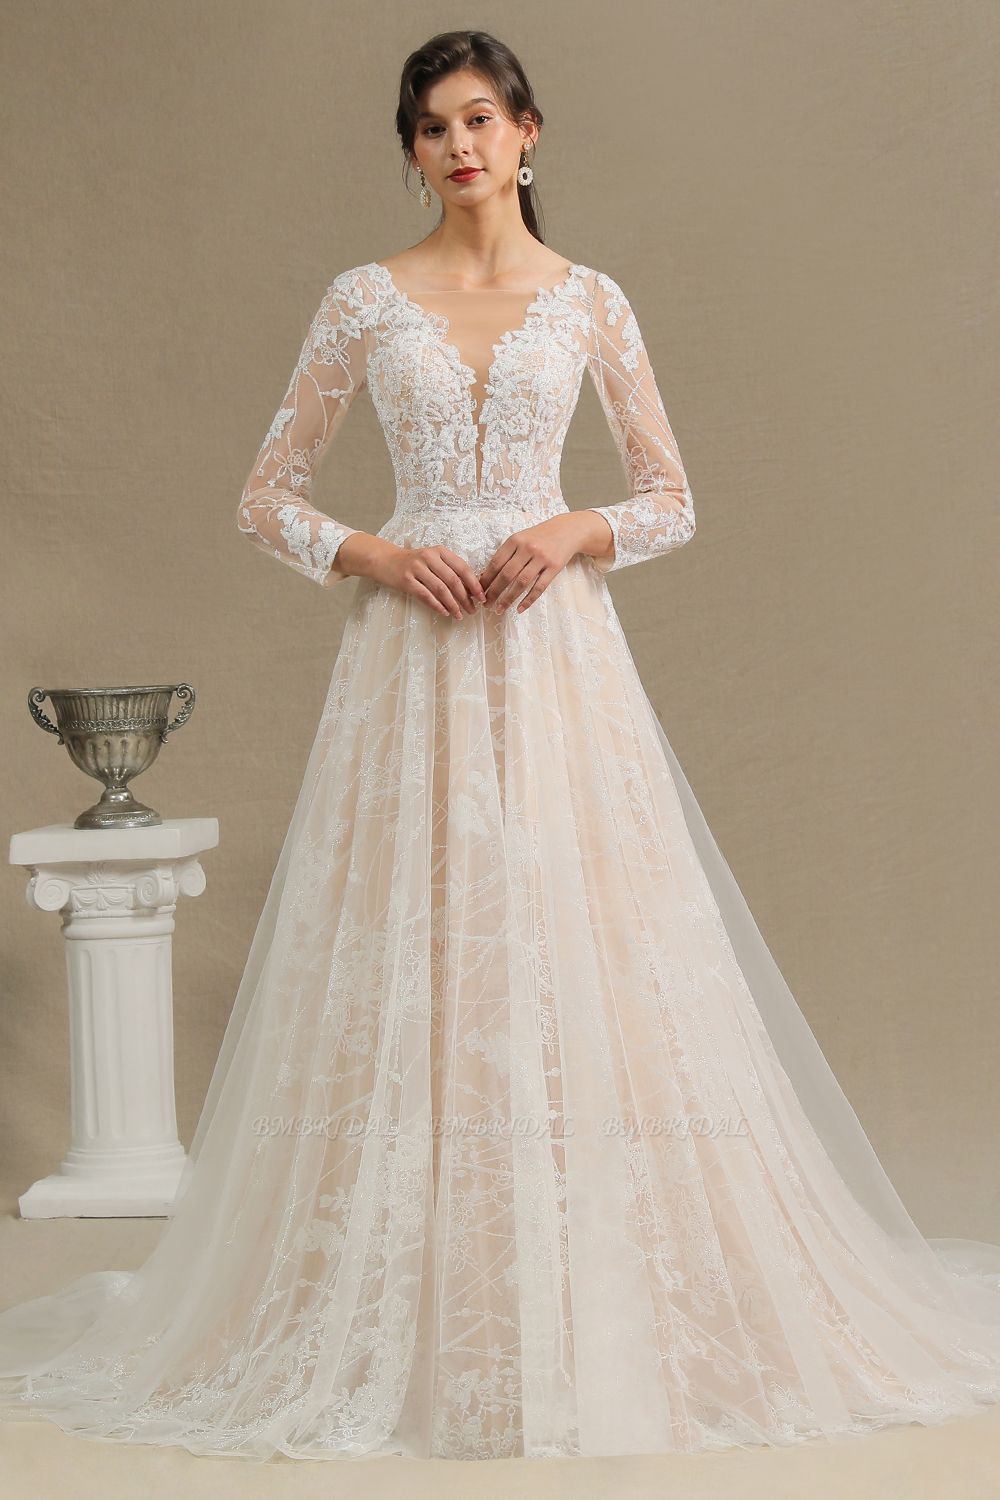 BMbridal Chic A-line Tulle Lace Wedding Dress Long Sleeves Ivory Bridal Gowns On Sale